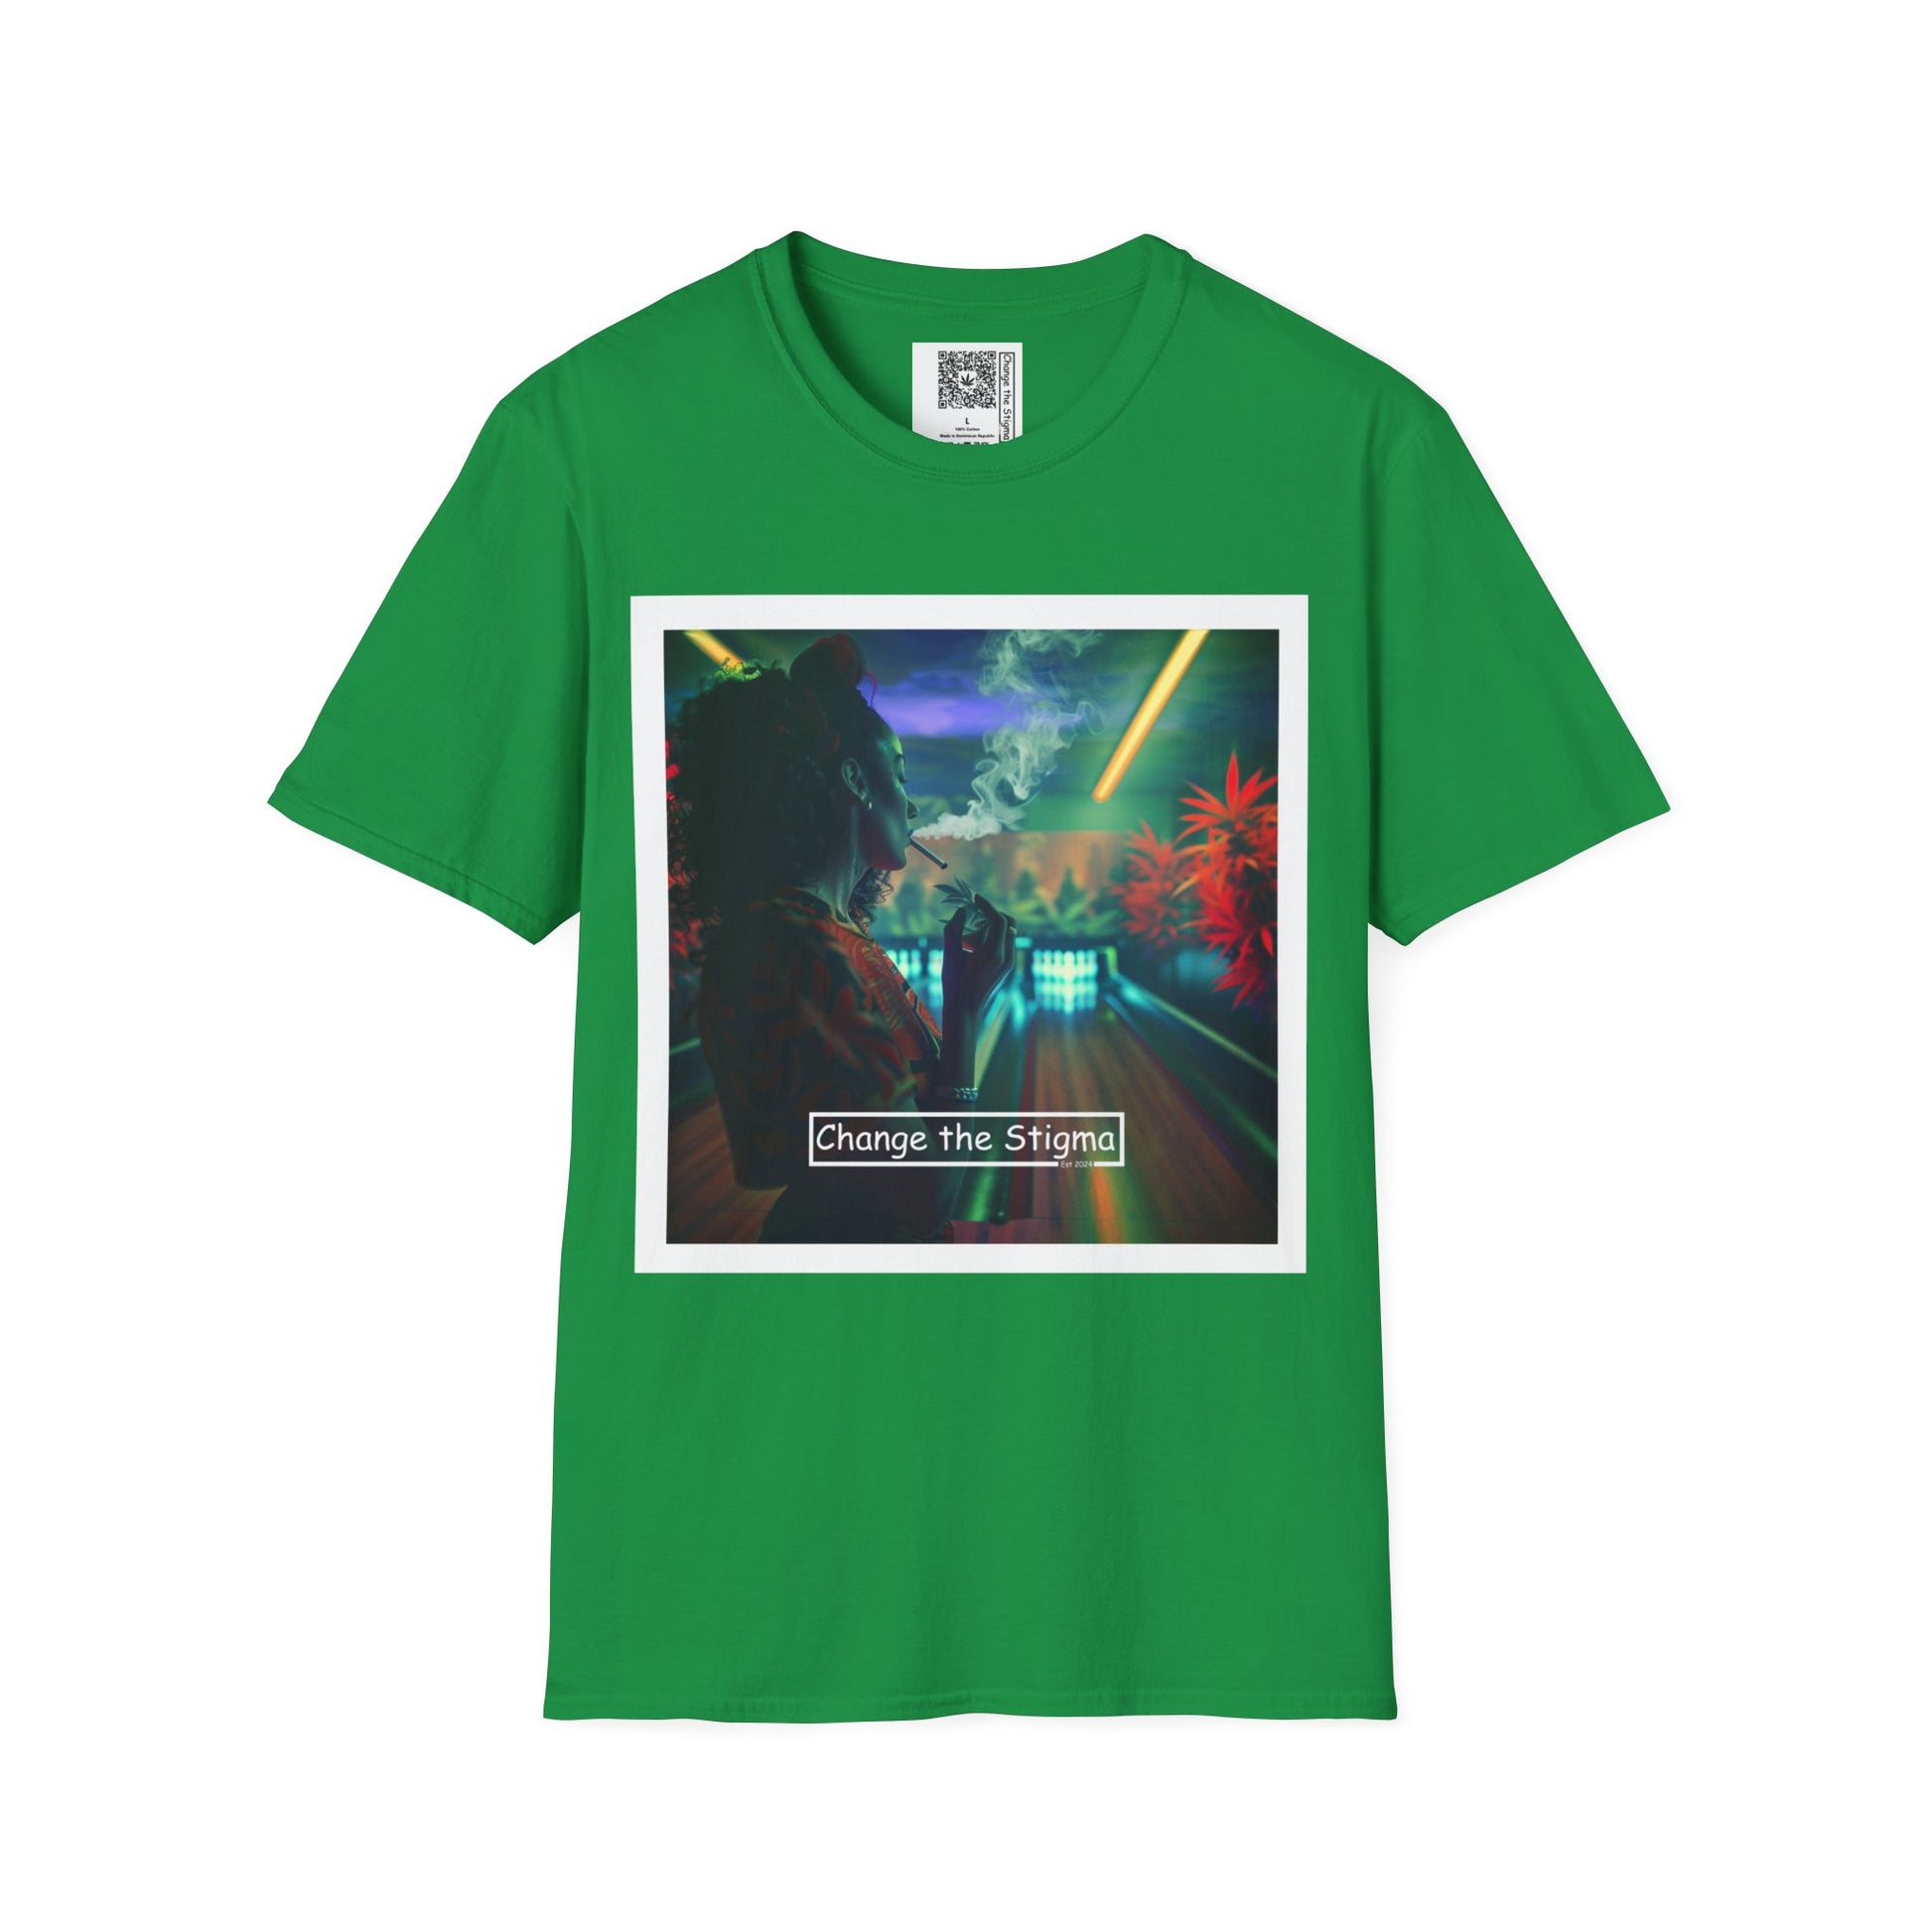 Change the Stigma, Irish Green color, shirt featuring a woman smoking cannabis while bowling, shirt is open displayed